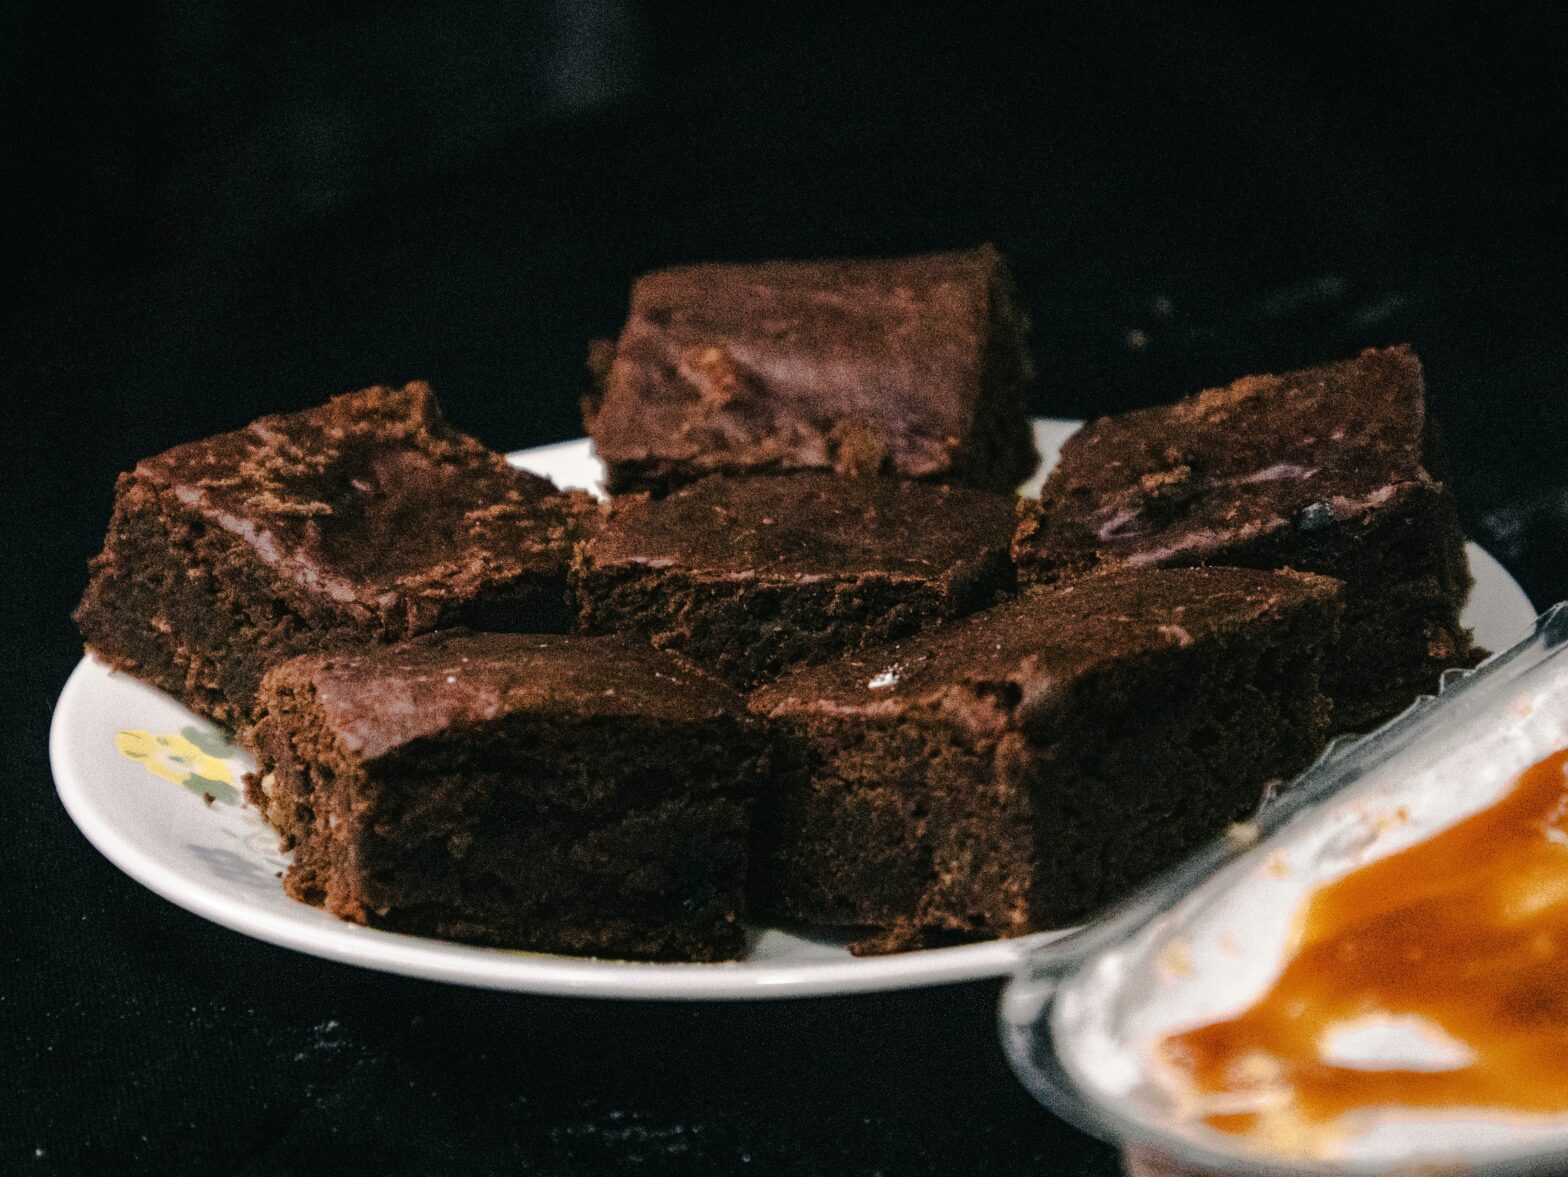 Six square chocolate brownies on a white plate with dark background. Photo by Azmaan Baluch on Unsplash https://unsplash.com/photos/chocolate-cake-on-white-ceramic-plate-BJsYX2m5hBc